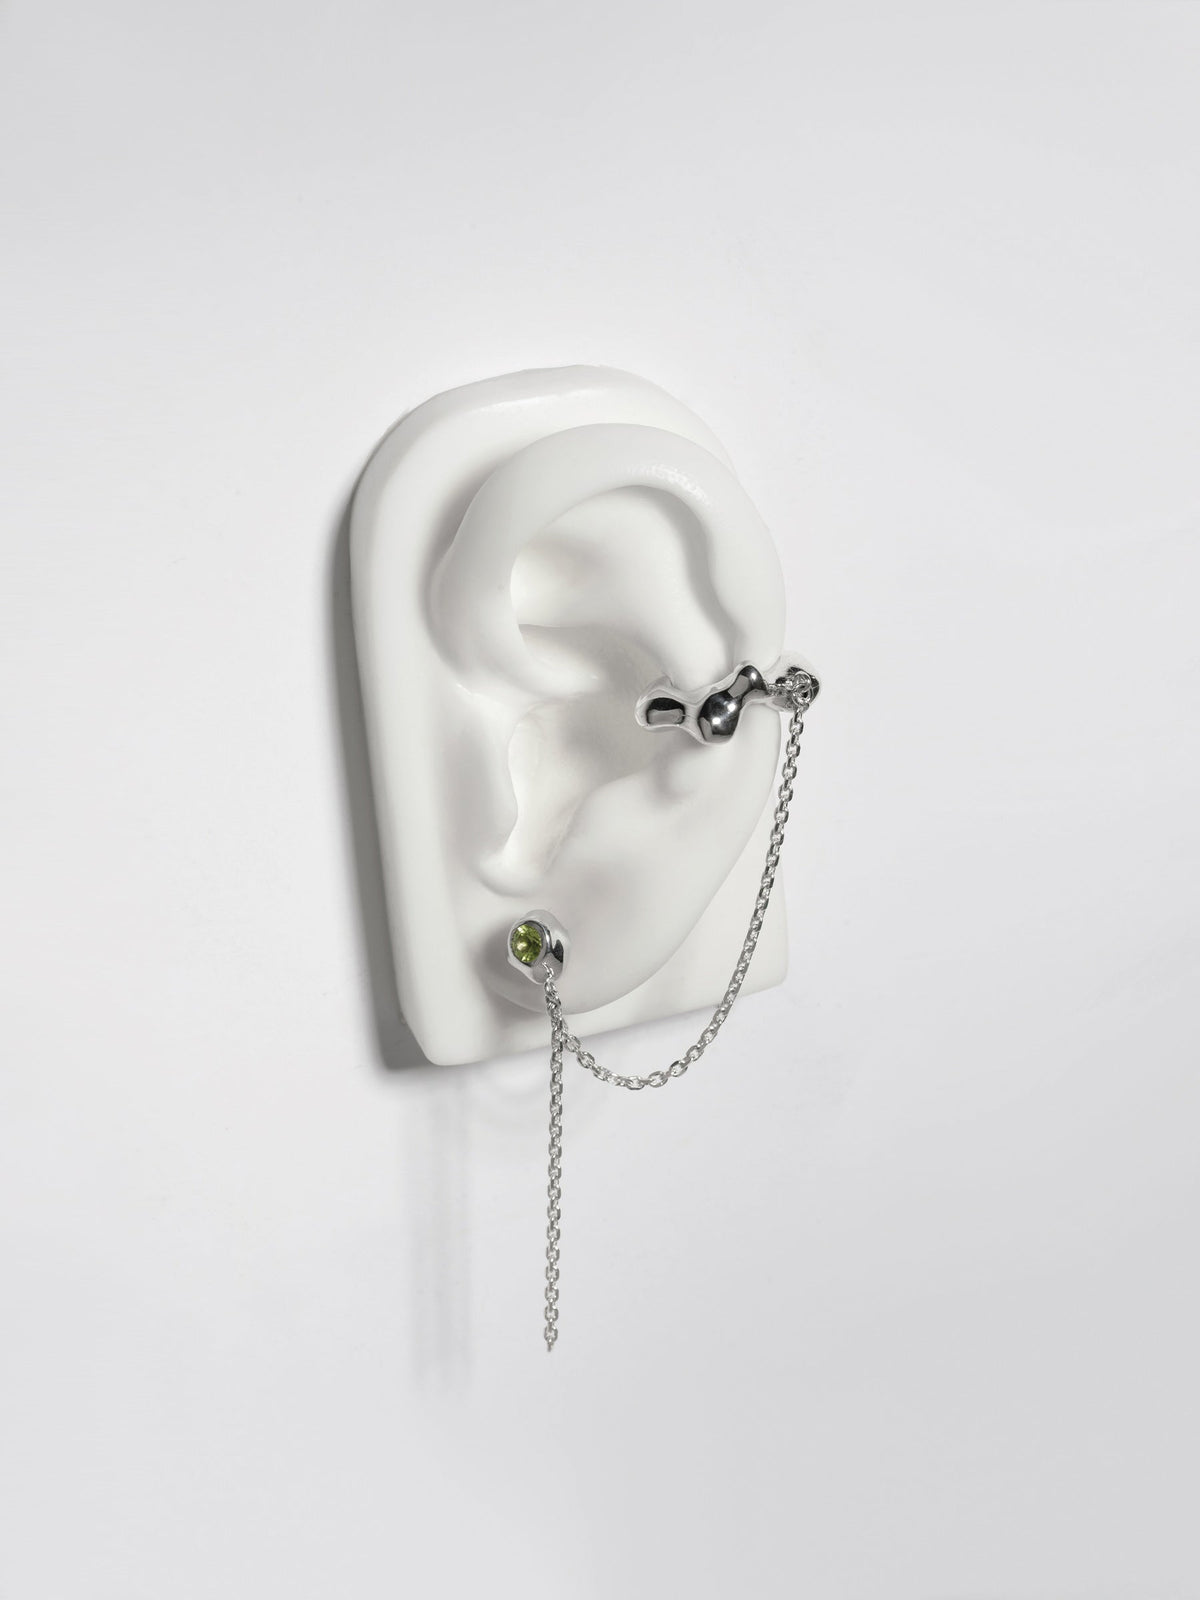 Product image of FARIS ZELDA Studcuff in sterling silver with peridot, shown on a white, silicon ear display